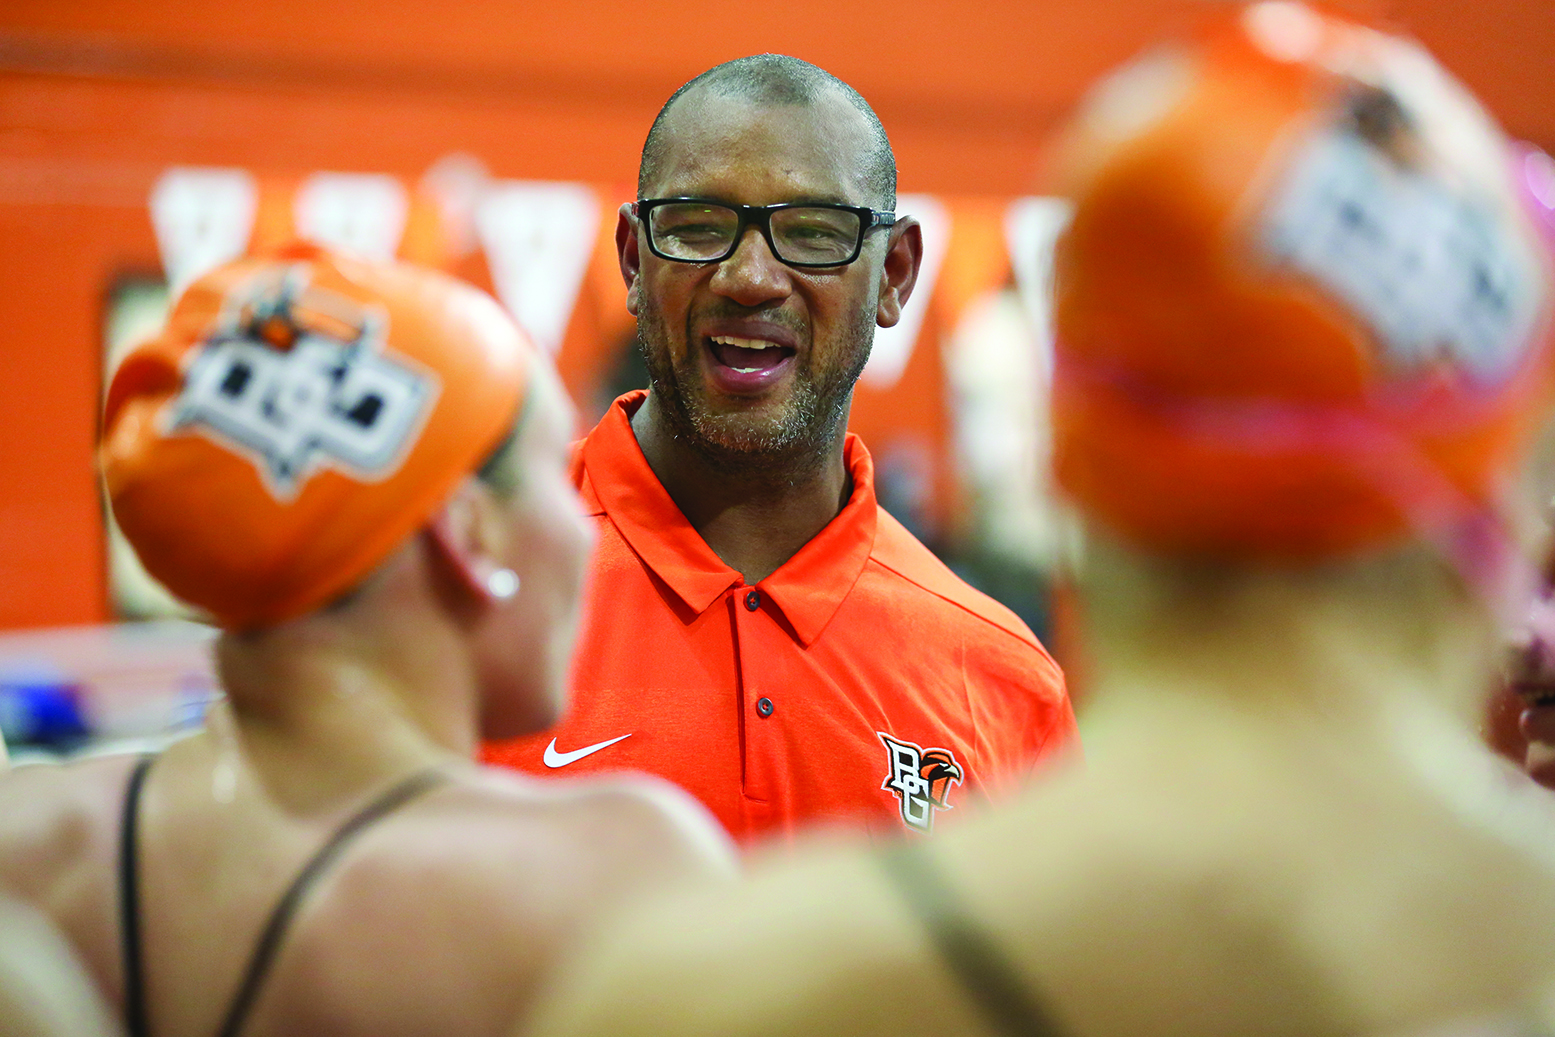 Rickey Perkins smiling at a few members of the Swimming and Diving team